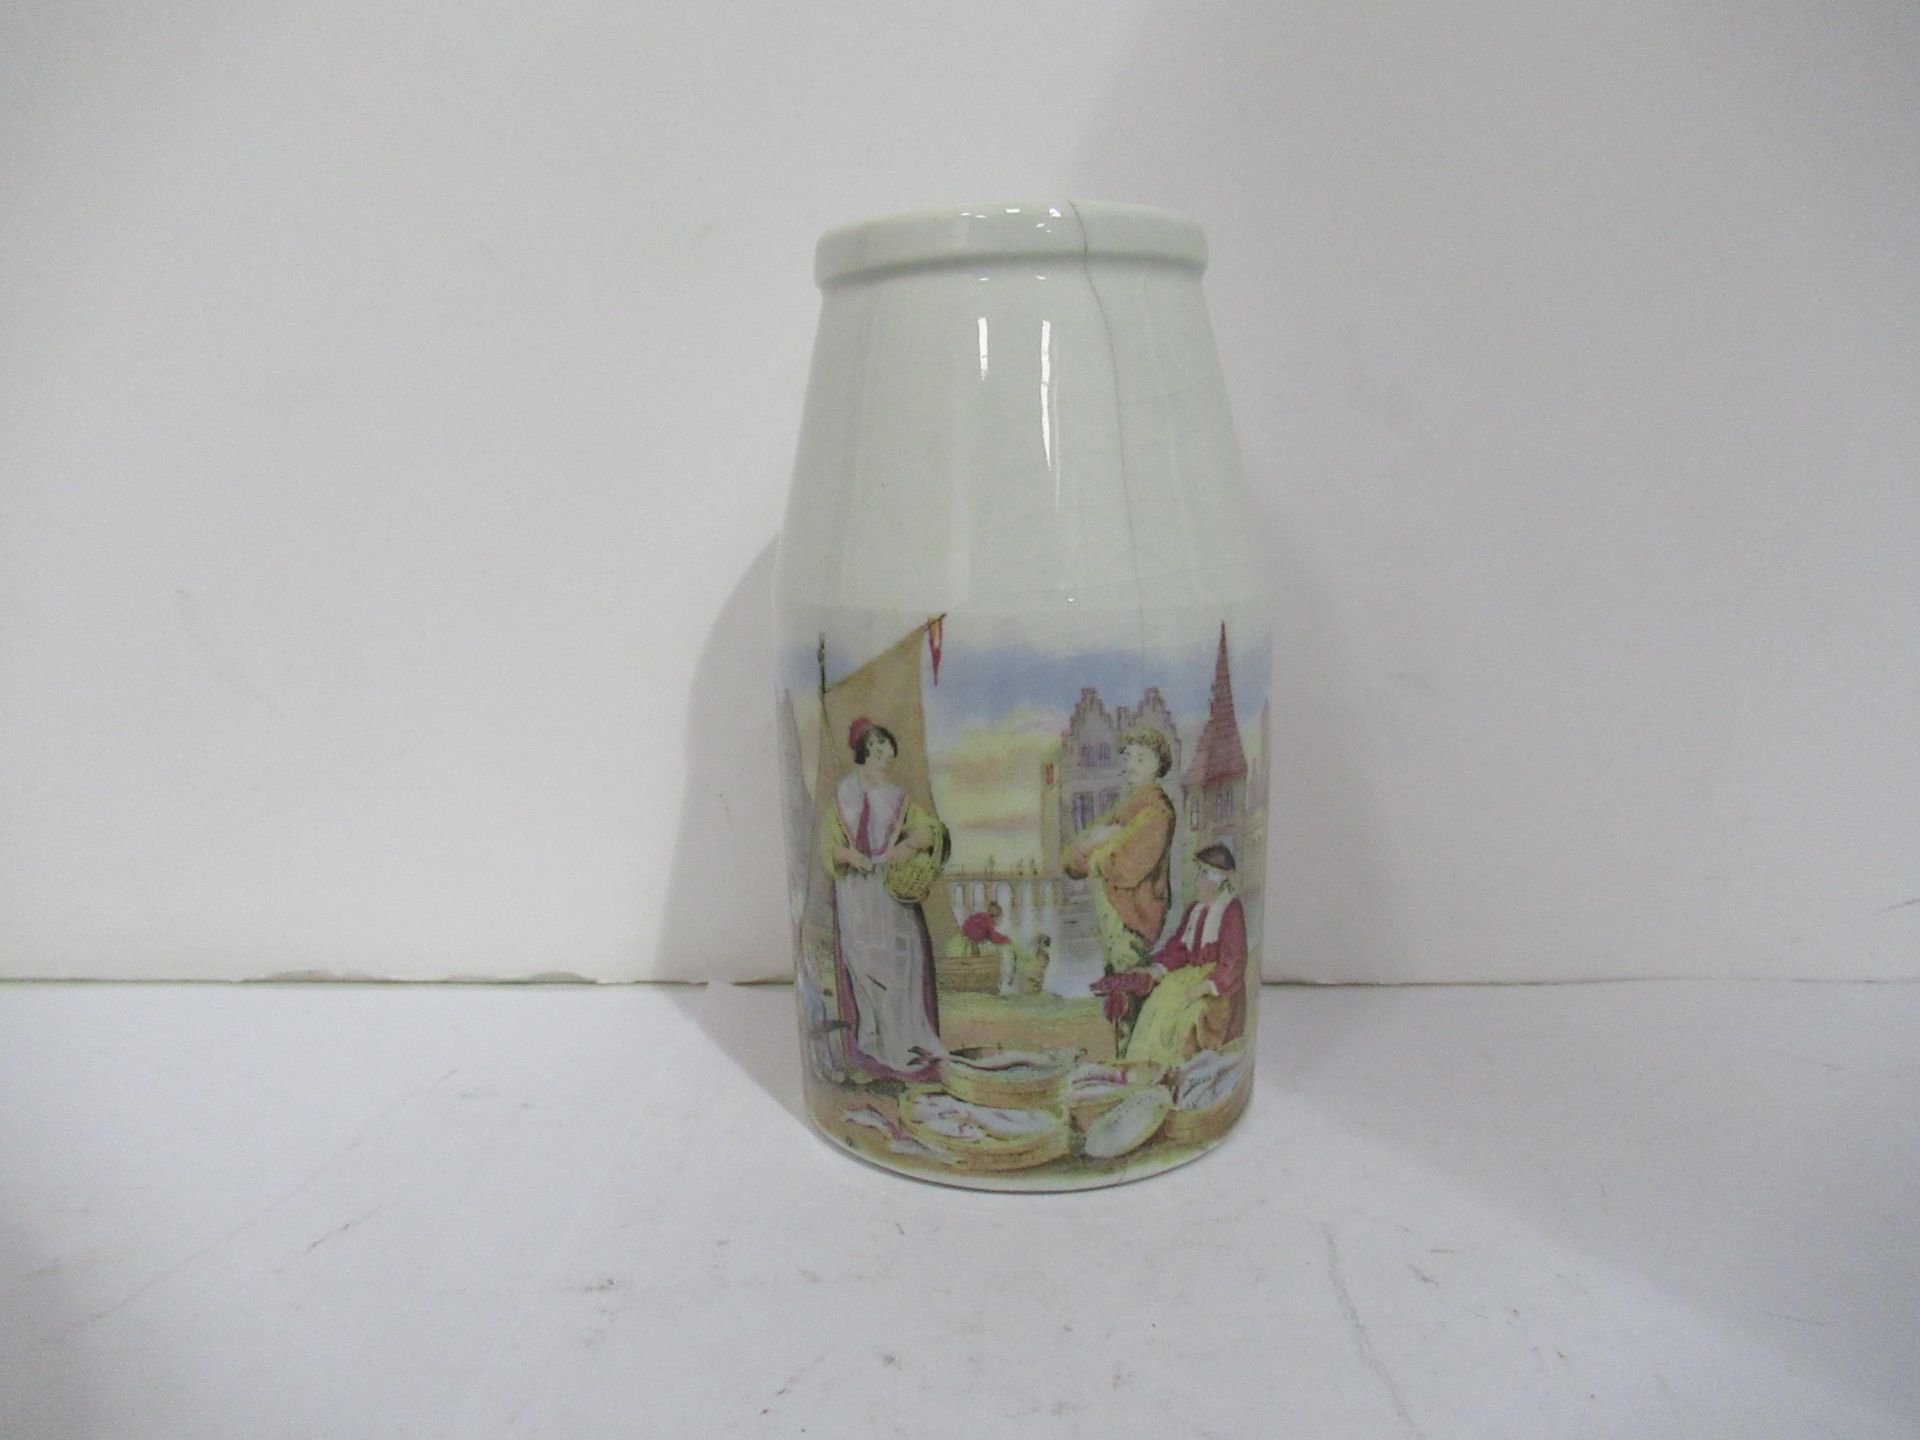 6x Prattware painted jars including one depicting Venice - Image 22 of 42